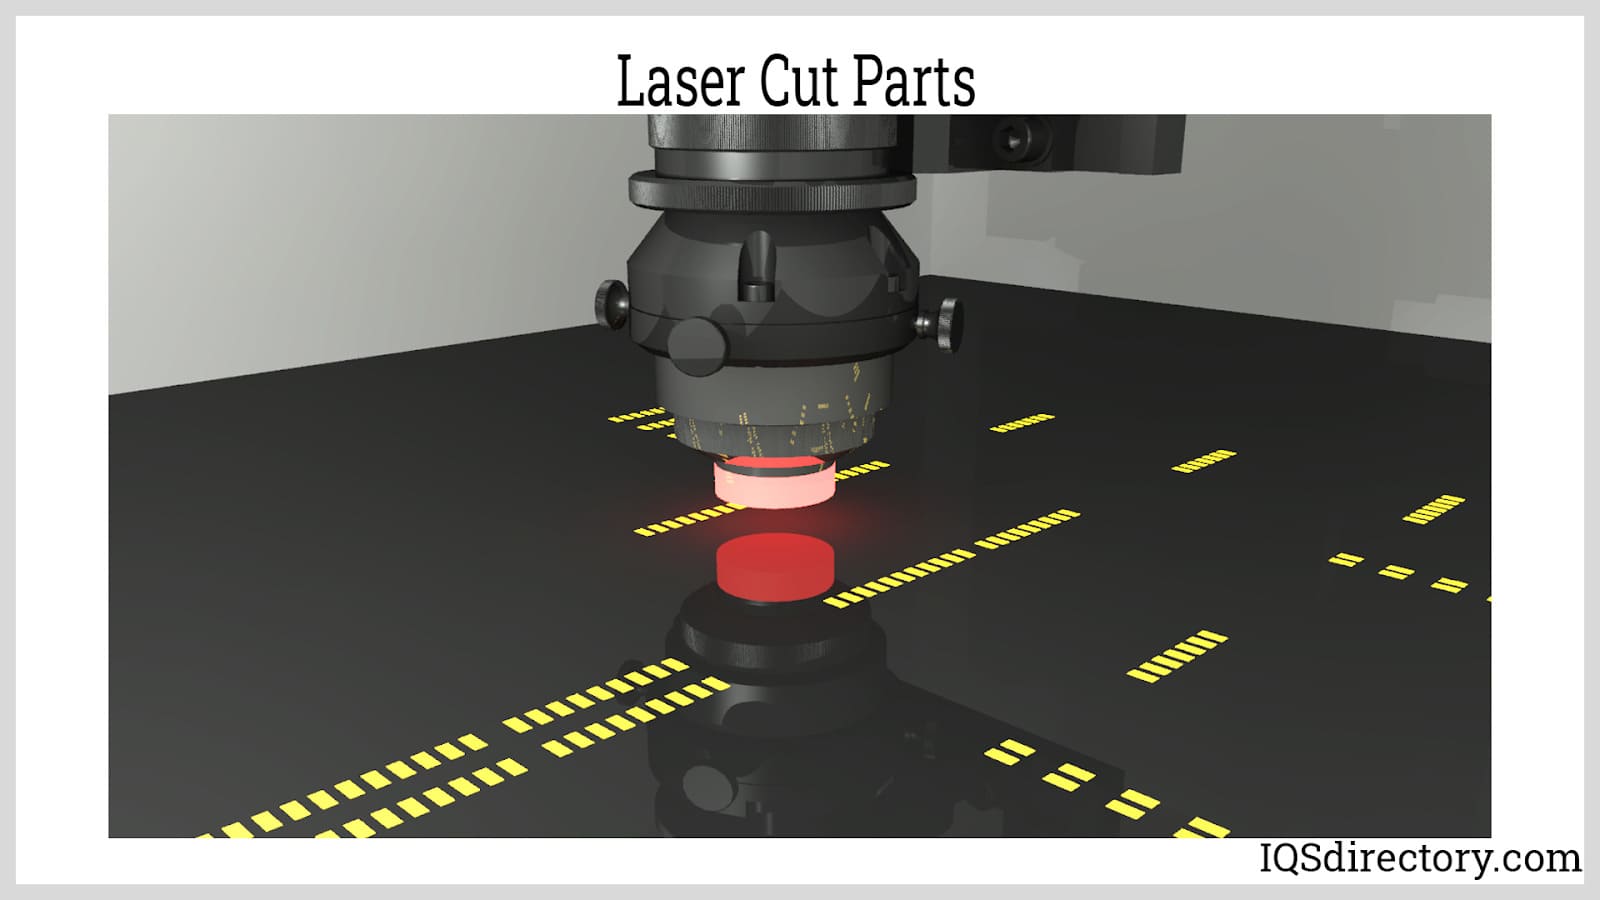 Importance of air assist for diode cutters? : r/lasercutting